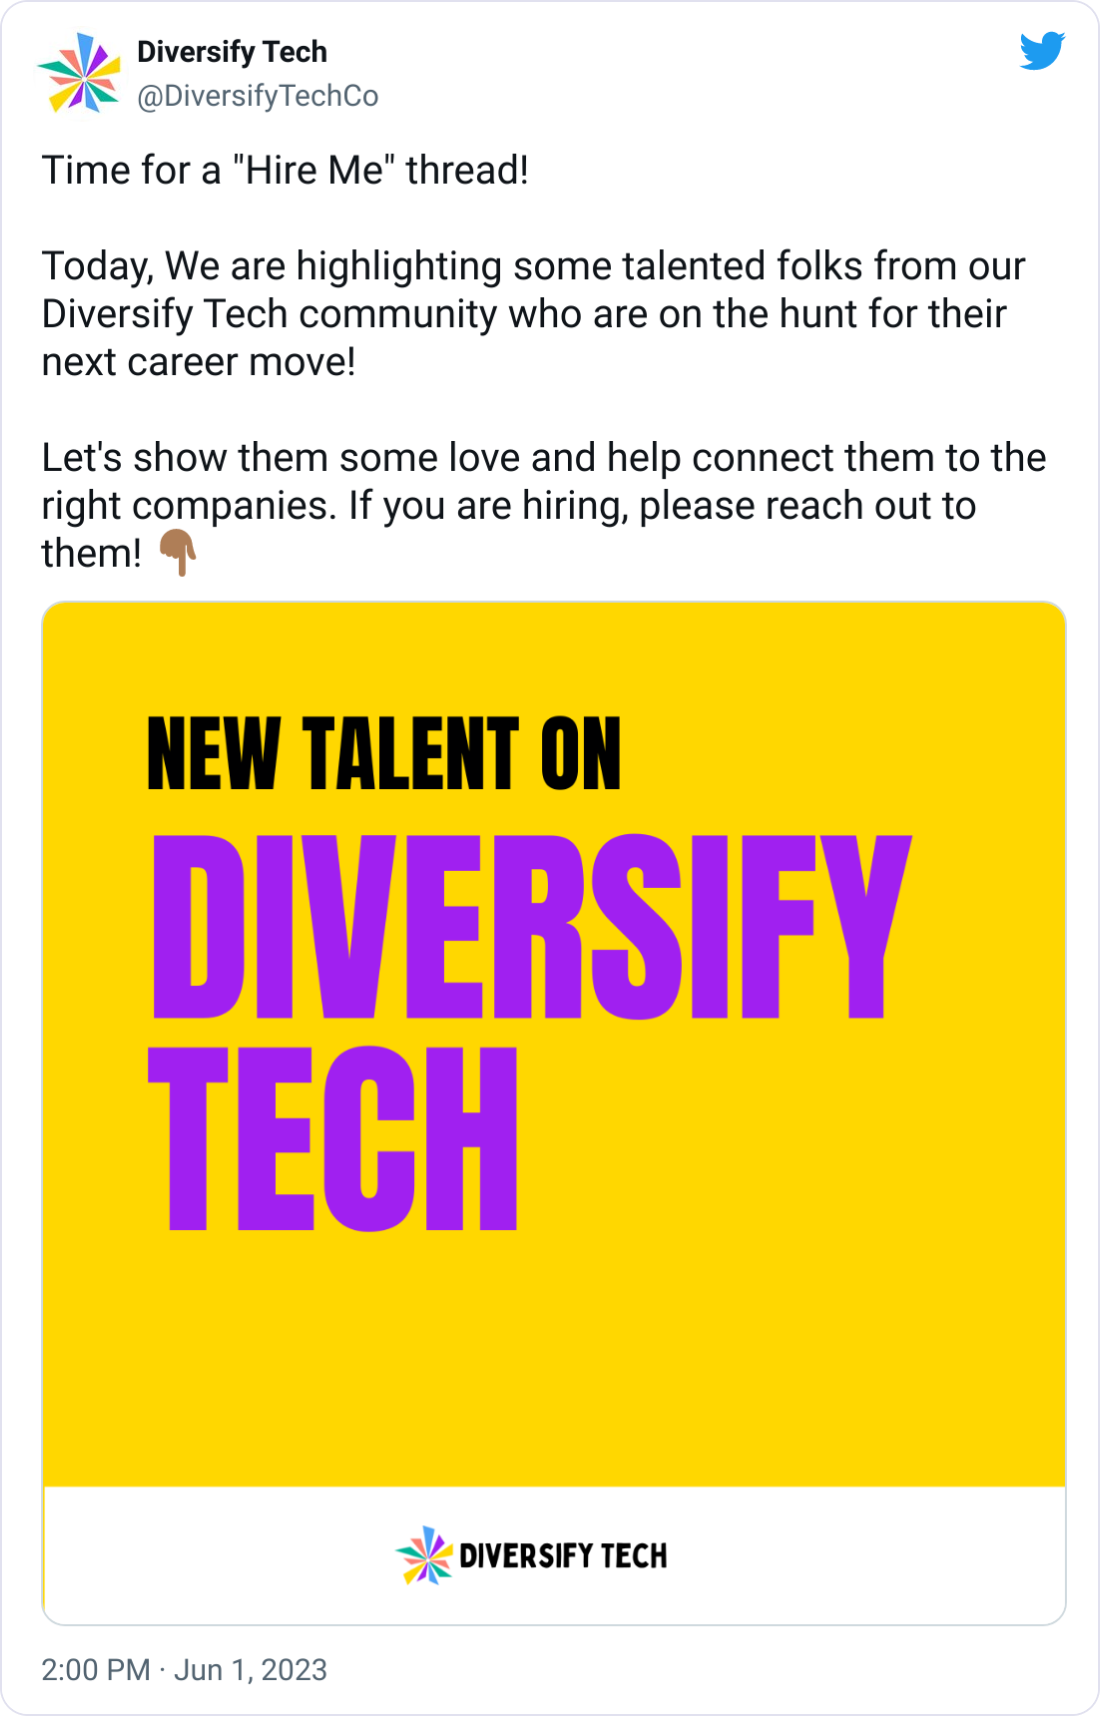 Diversify Tech @DiversifyTechCo Time for a "Hire Me" thread!  Today, We are highlighting some talented folks from our Diversify Tech community who are on the hunt for their next career move!  Let's show them some love and help connect them to the right companies. If you are hiring, please reach out to them! 👇🏾